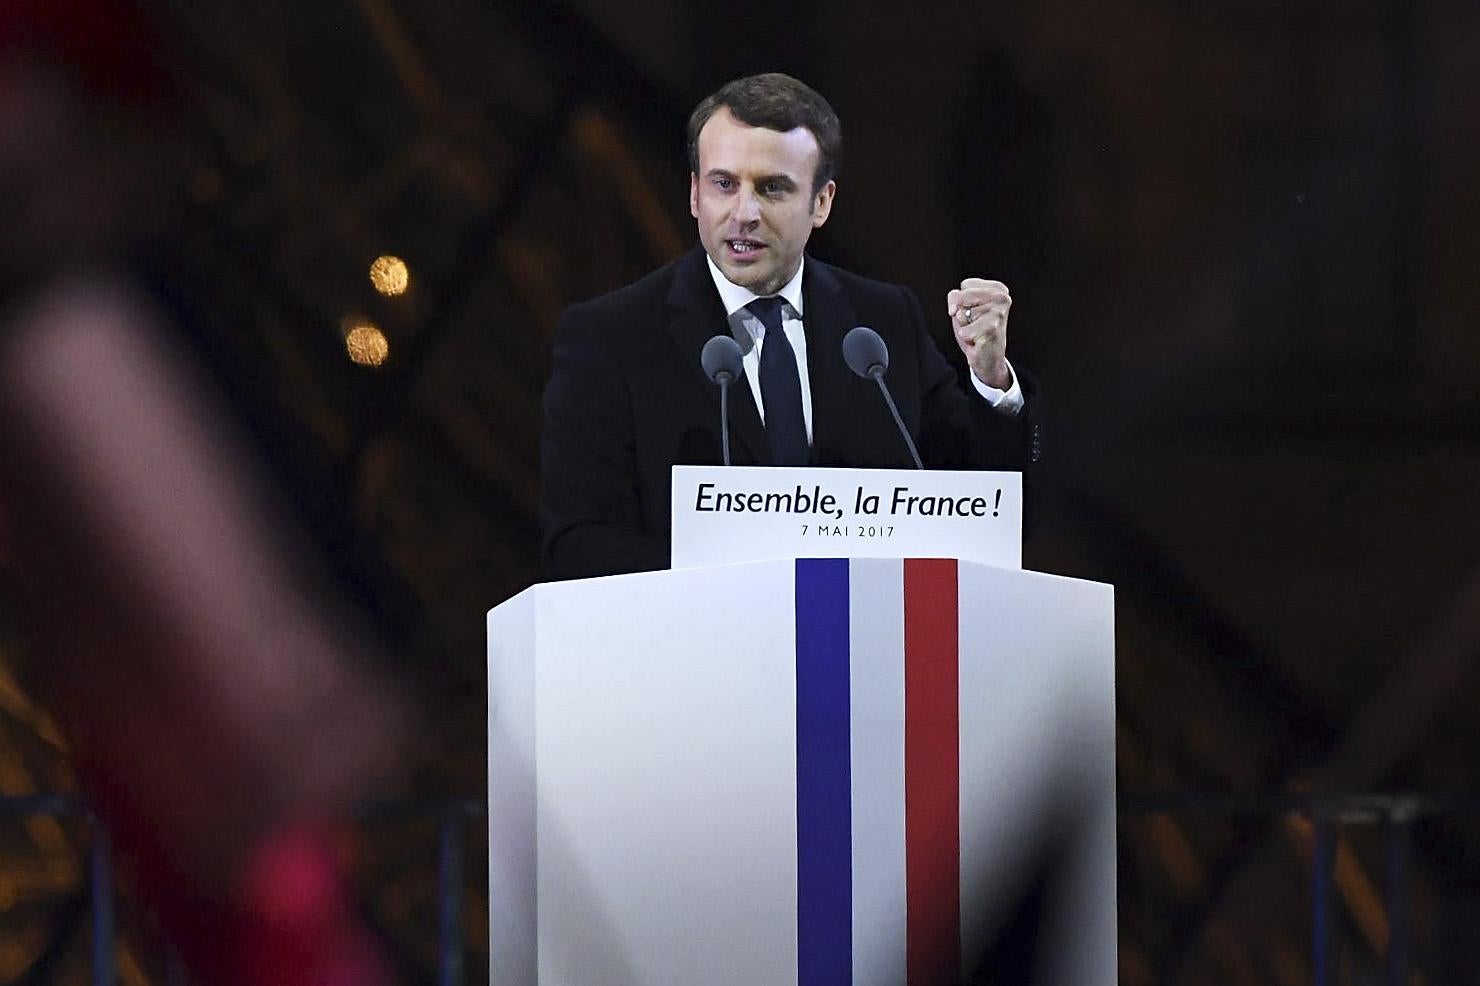 &#13;
Emmanuel Macron at his victory speech in Paris on Sunday (Getty)&#13;